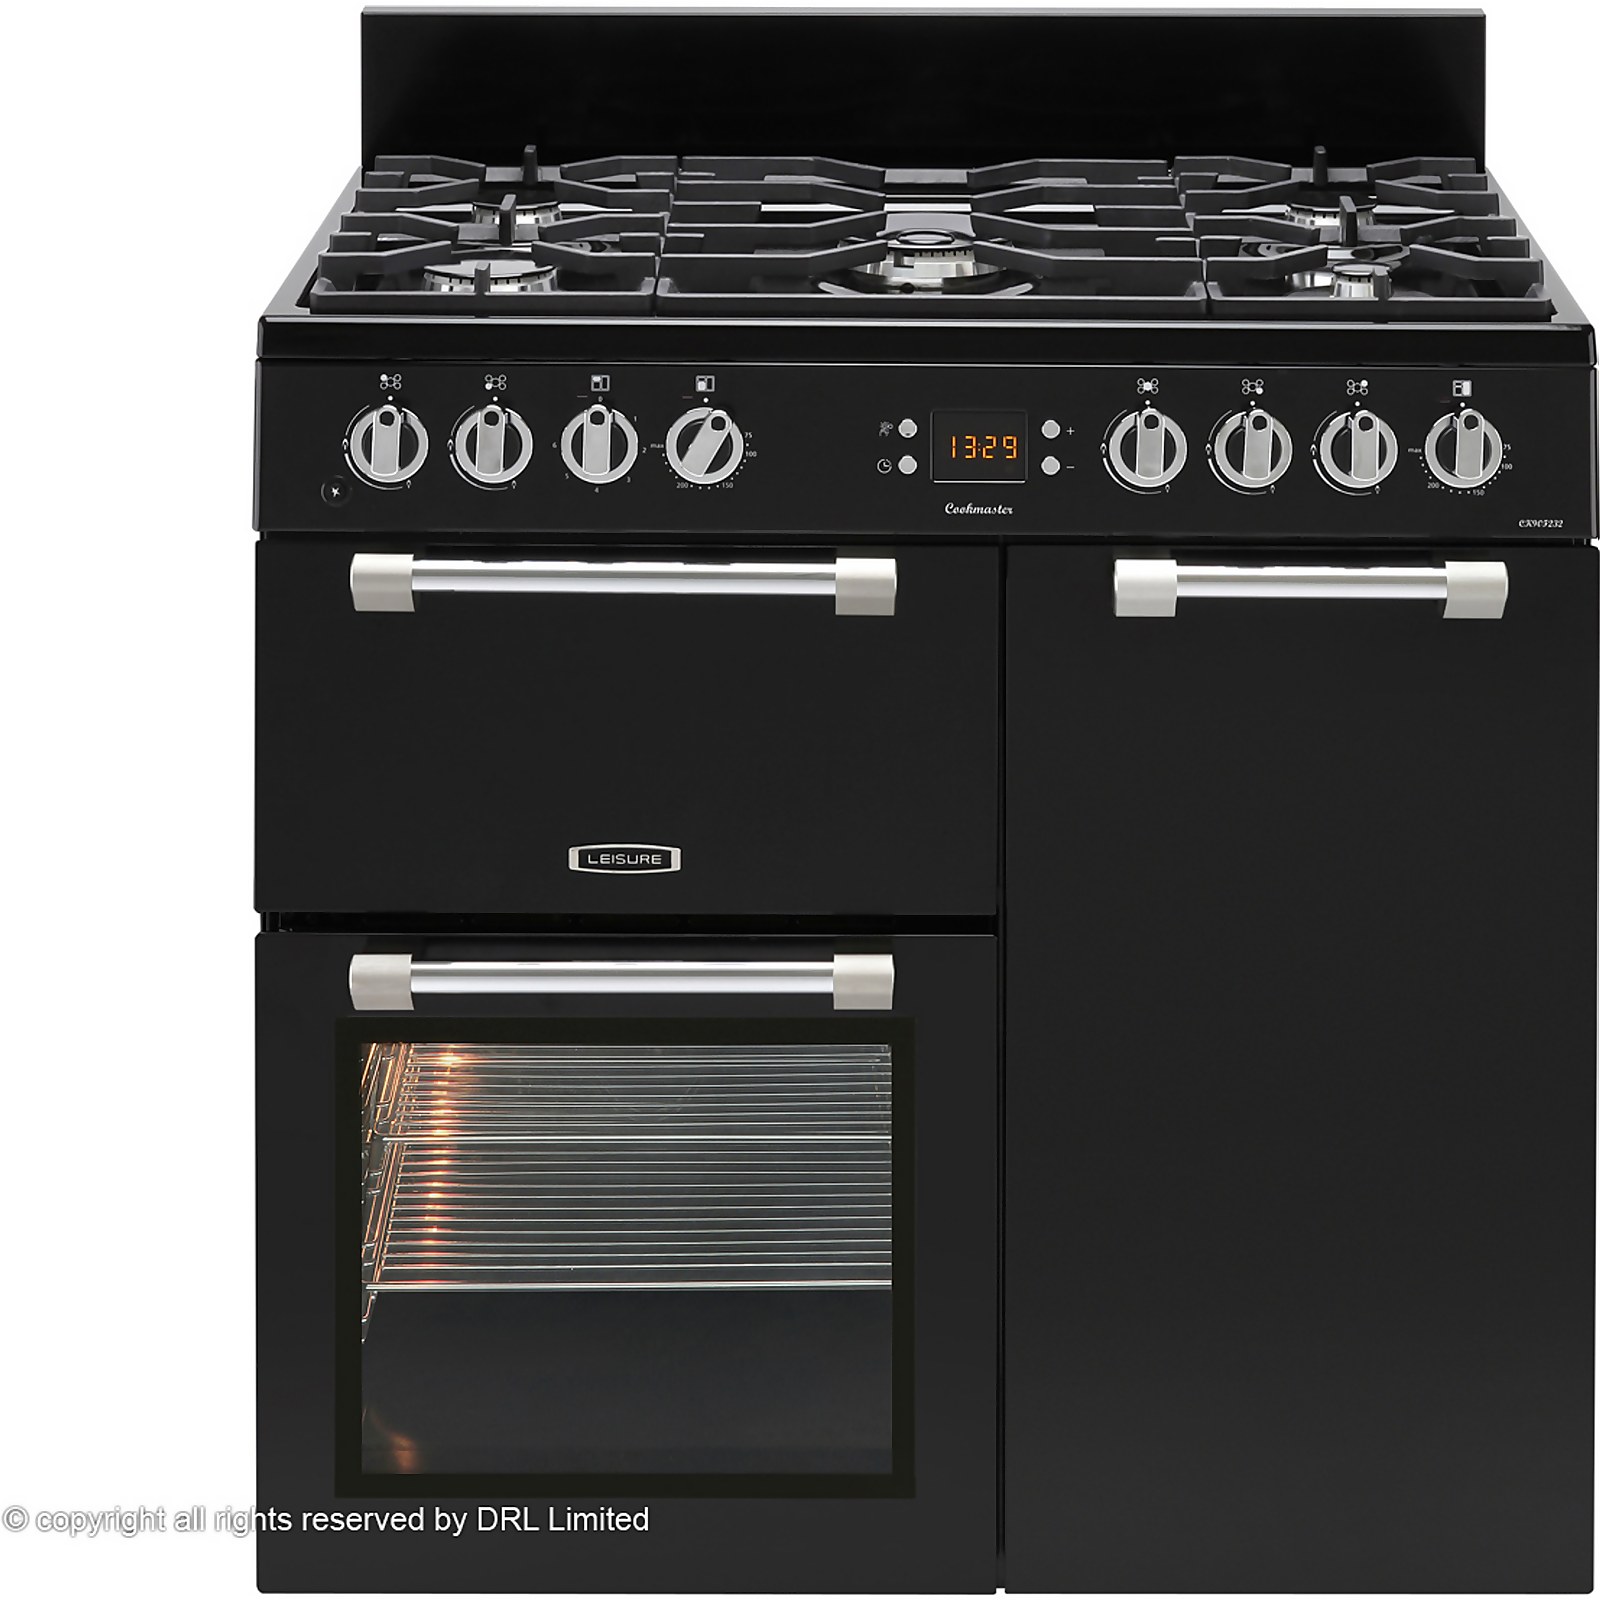 Photo of Leisure Cookmaster Ck90f232k 90cm Dual Fuel Range Cooker - Black - A/a Rated